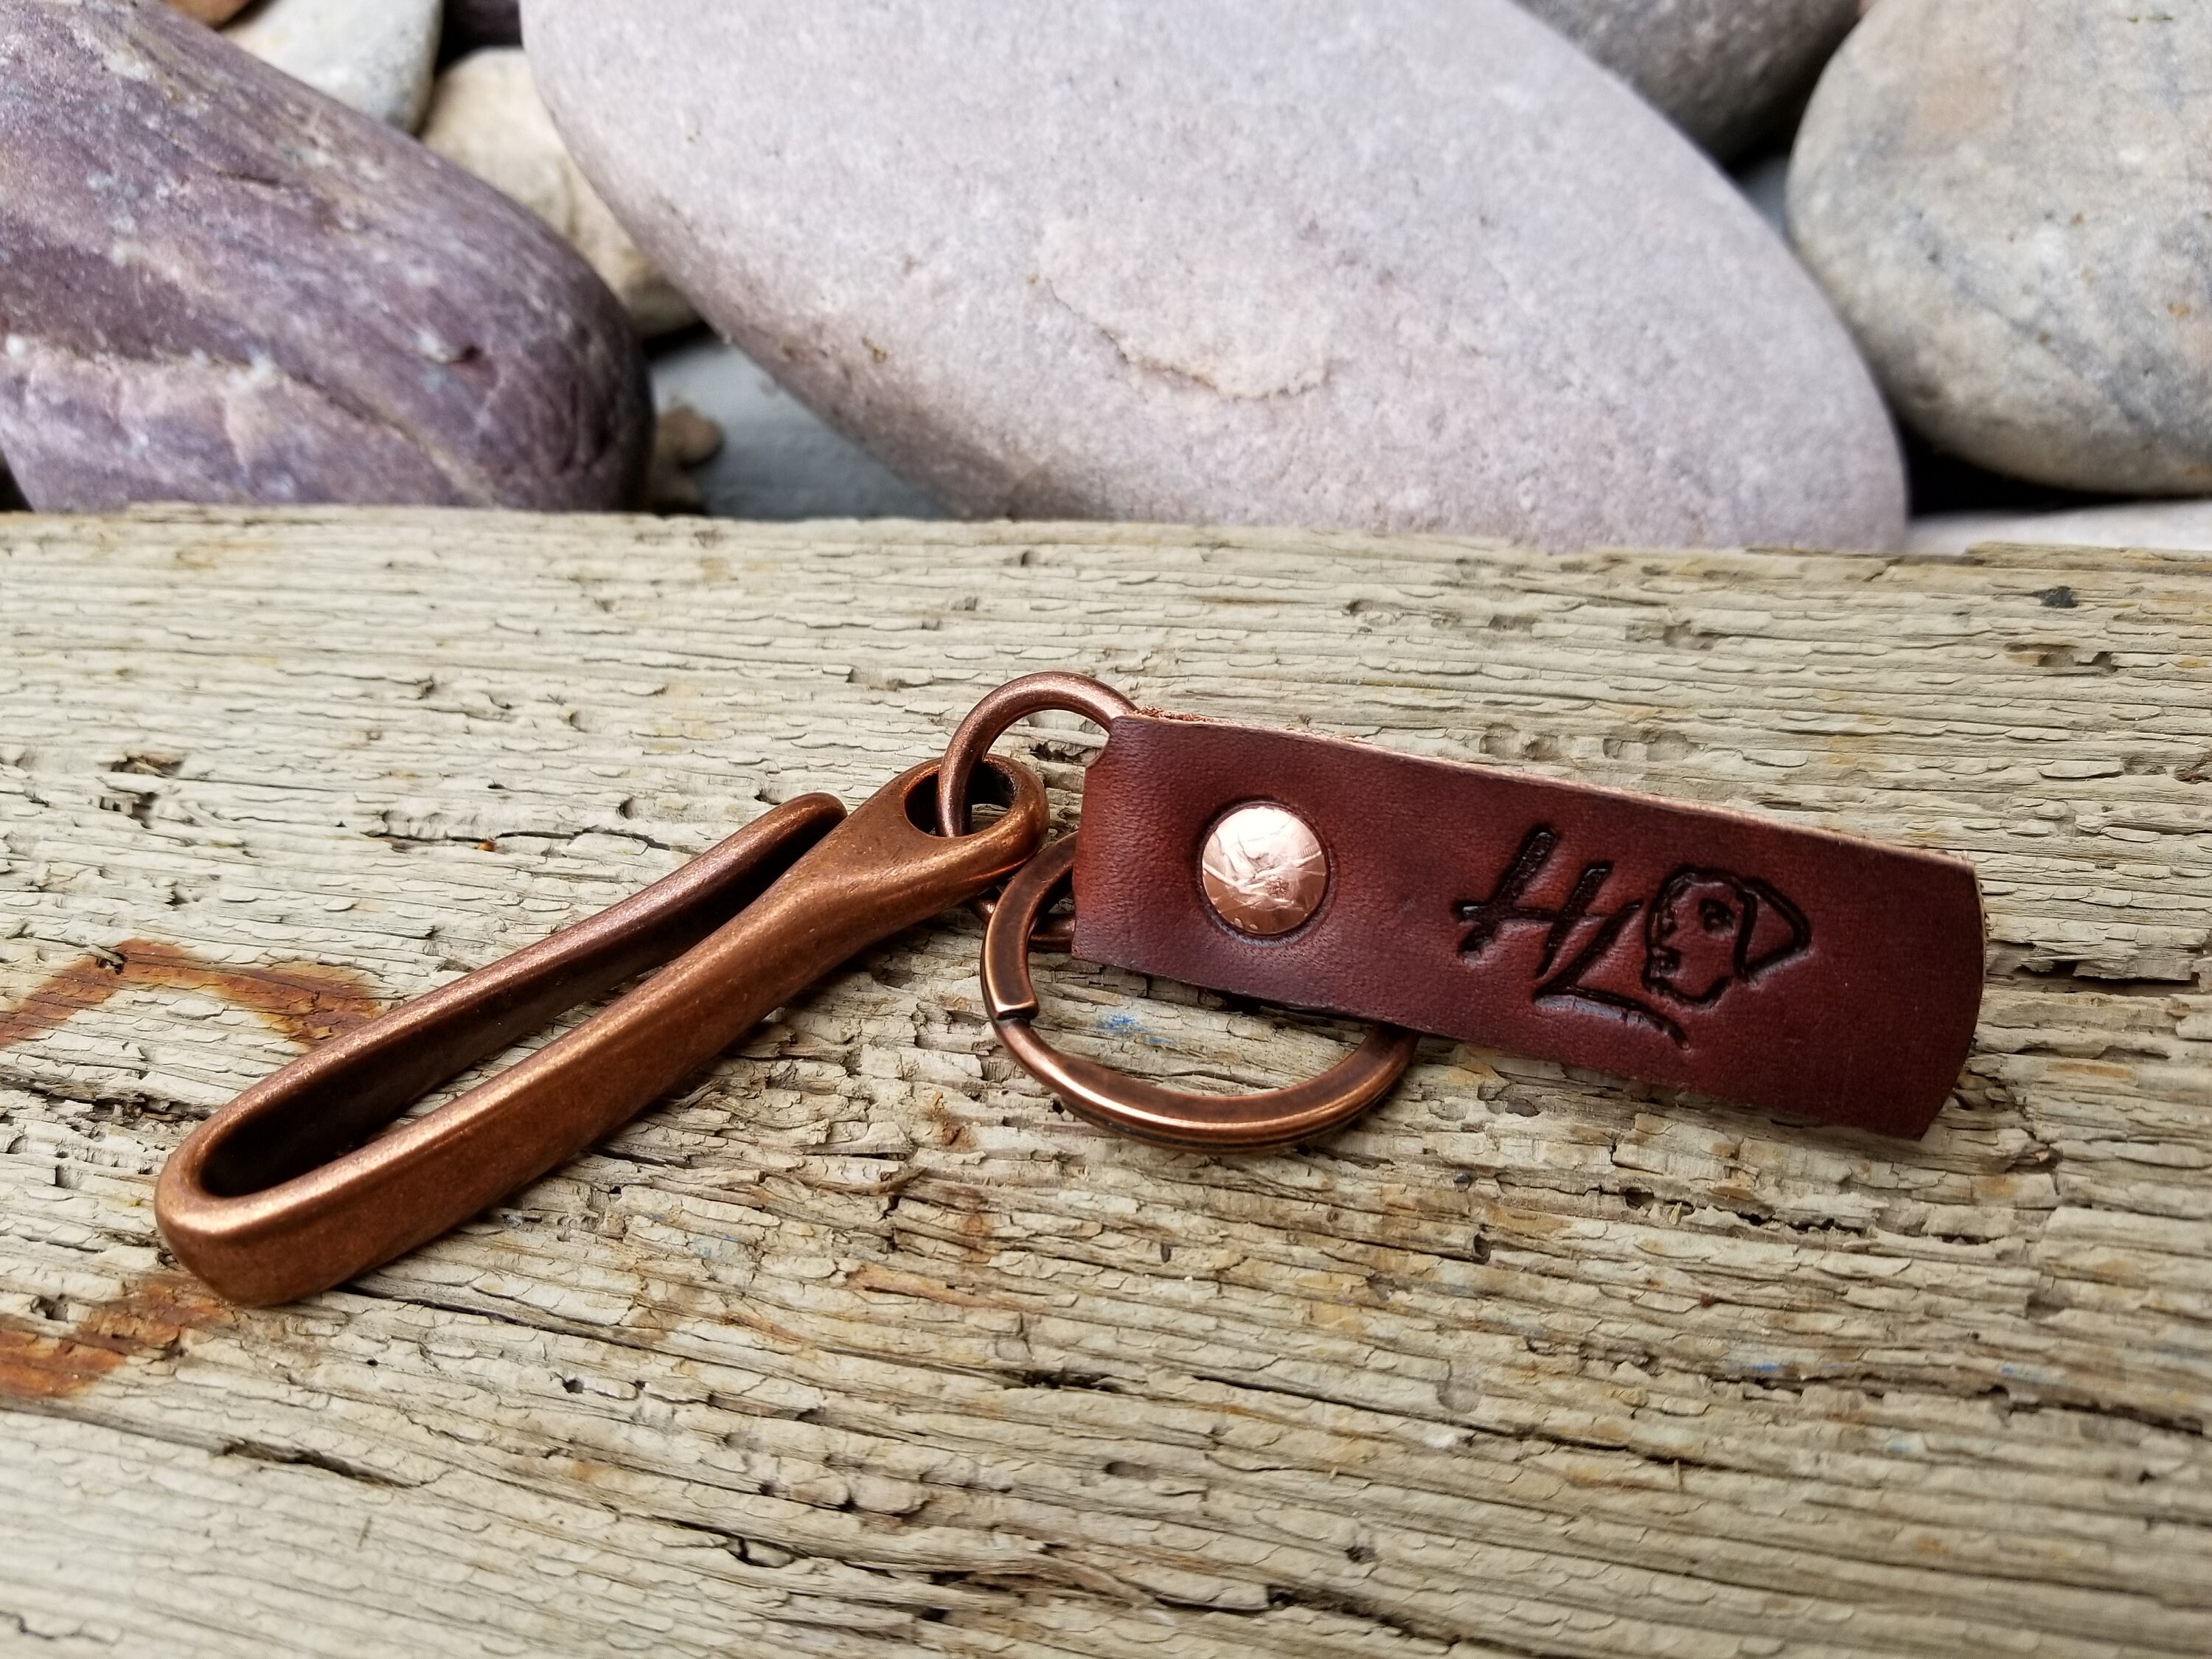 Hook Leather Keyfob, Leather Keychain by Hellhound Leather Co Nickel Plate